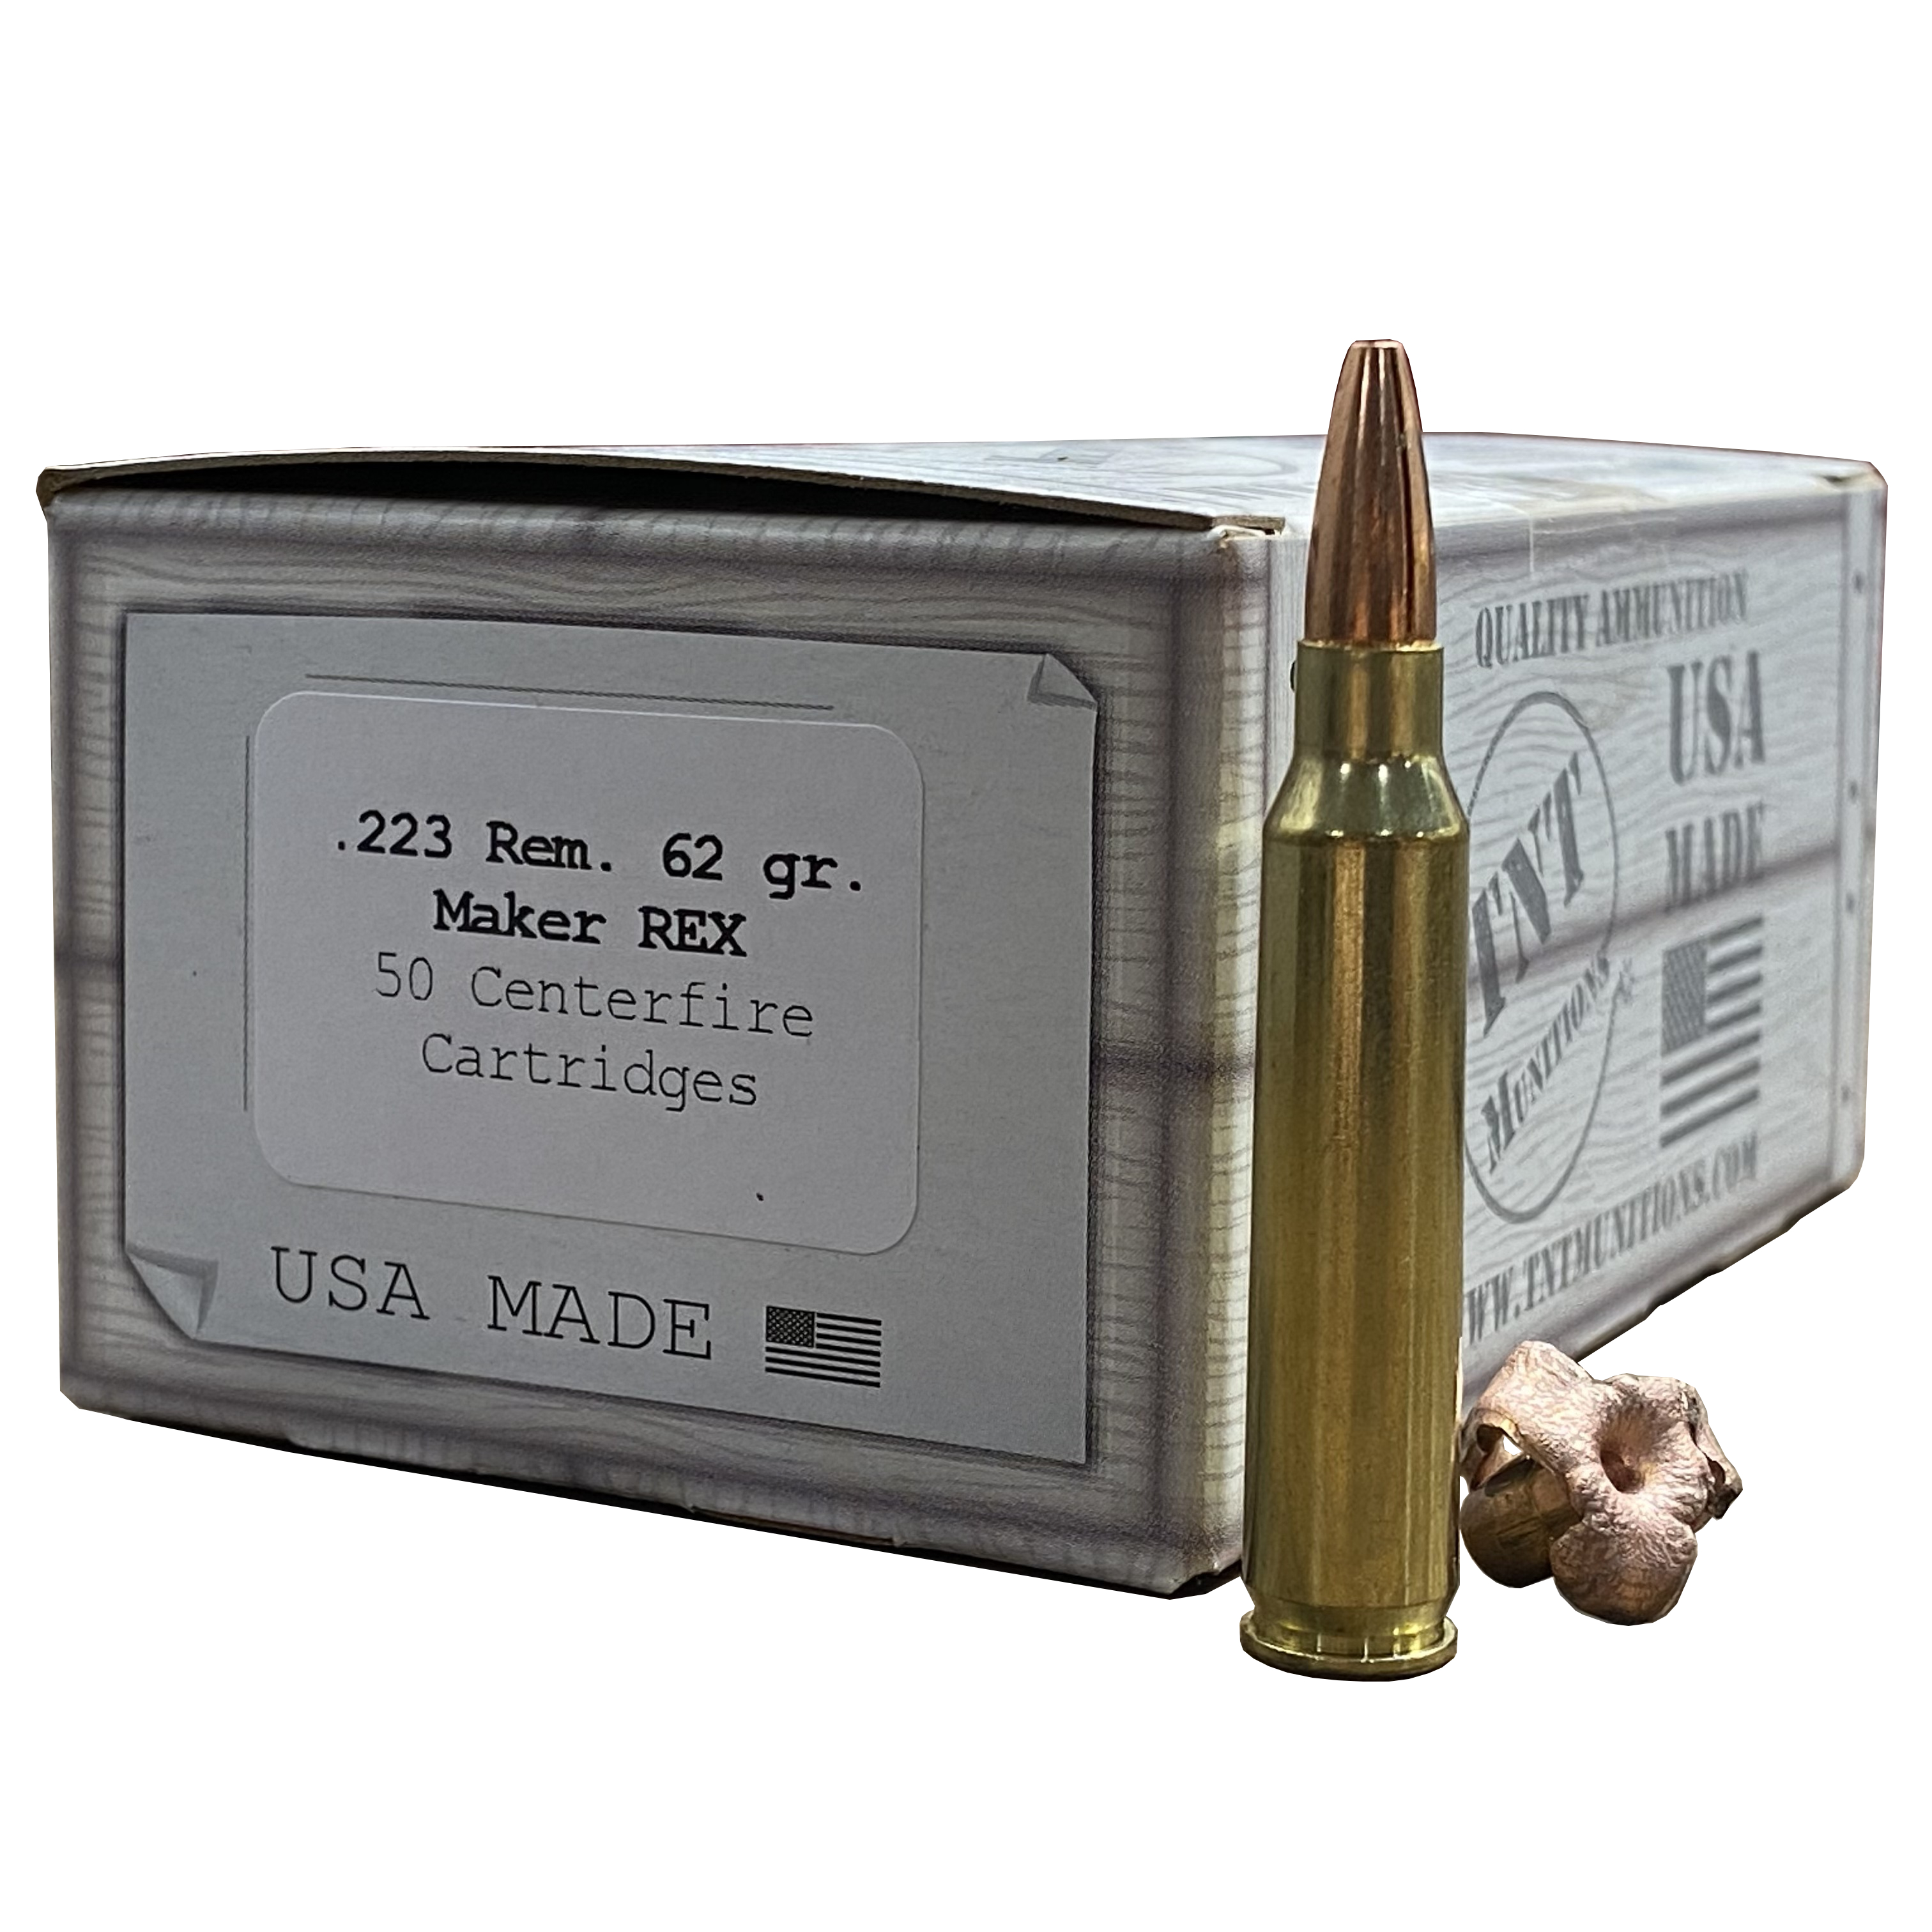 .223 Rem. 62 gr. Maker REX. MEMORIAL DAY SALE! THROUGH MAY 29TH ONLY - SHIPS NBD  - (LEAD-FREE)